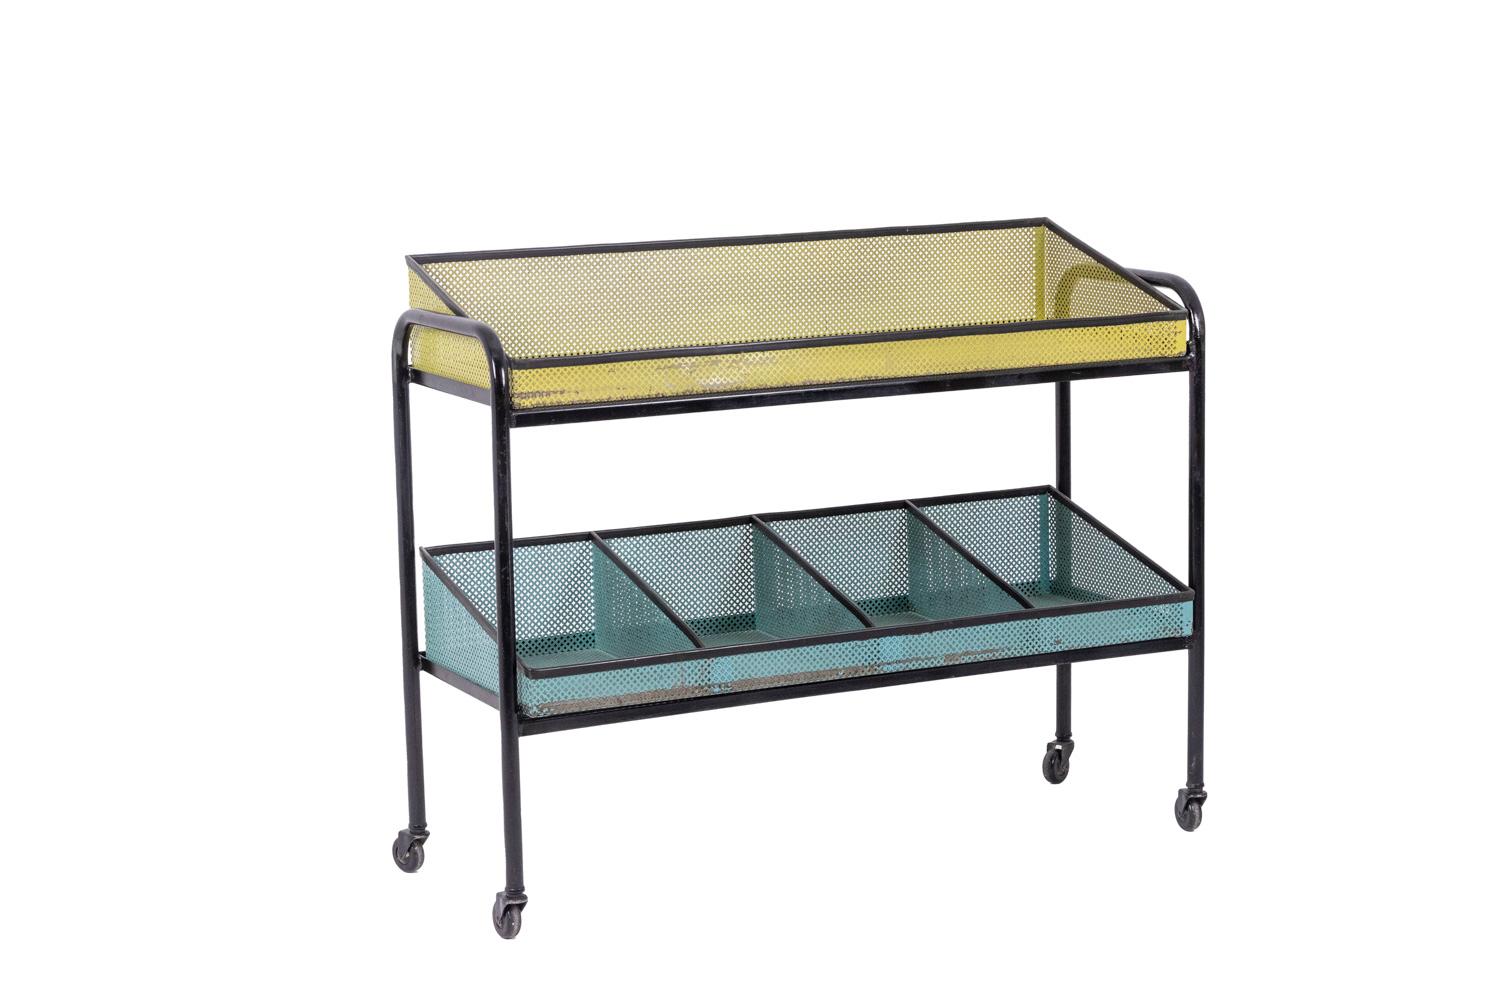 Pair of consoles with two interchangeable and removable rows in perforated sheet metal decorated with stars and circles, one of the two trays with four compartments, yellow and blue. Base in black lacquered metal resting on casters.

Possibility